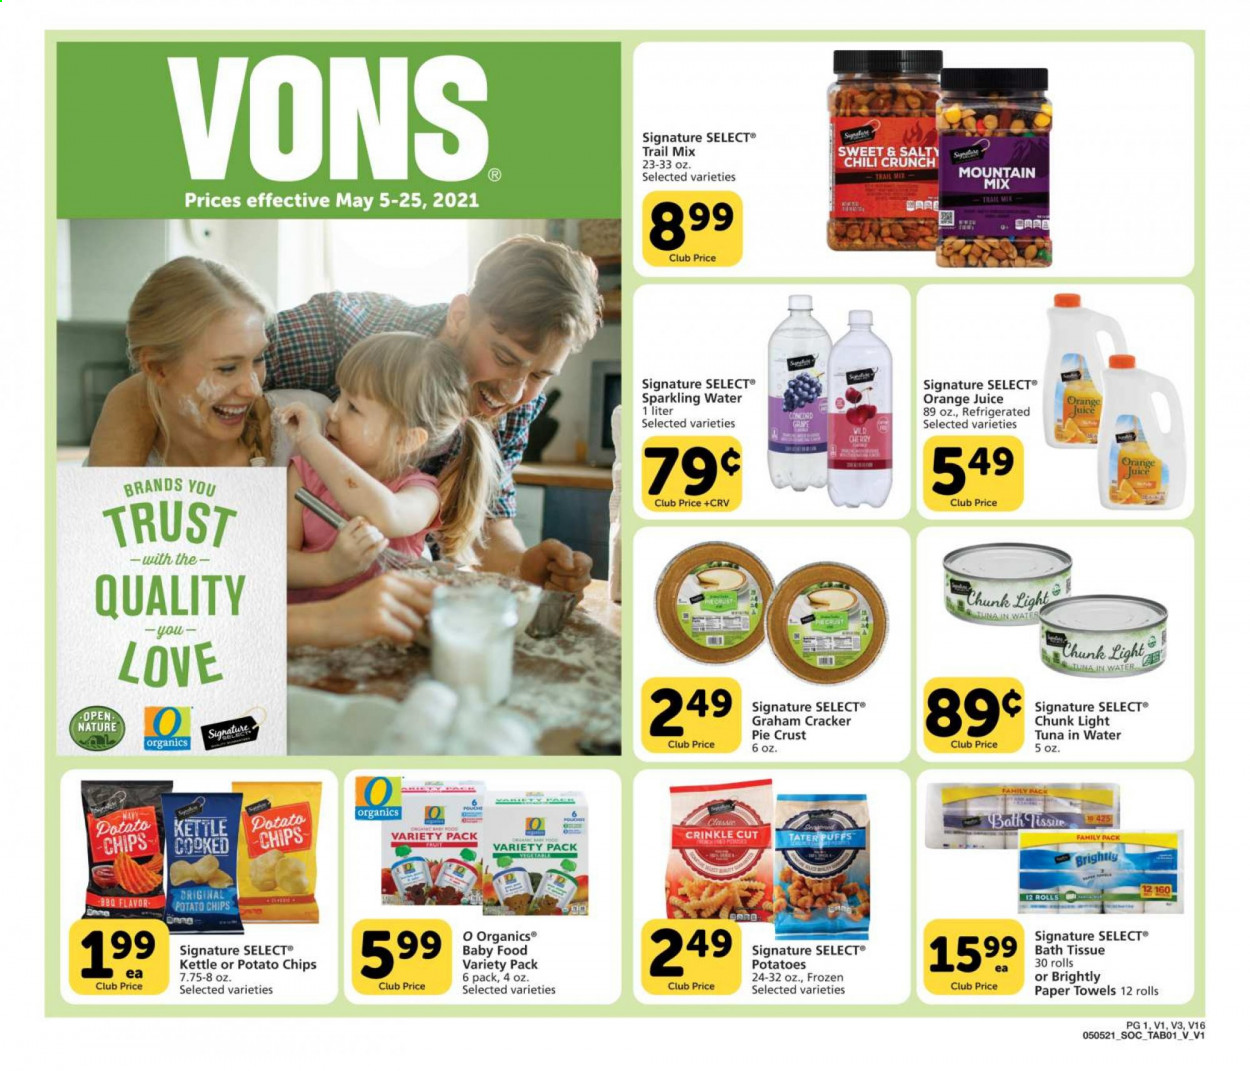 thumbnail - Vons Flyer - 05/05/2021 - 05/25/2021 - Sales products - puffs, cherries, tuna, crinkle fries, crackers, potato chips, pie crust, tuna in water, light tuna, trail mix, orange juice, juice, sparkling water, bath tissue, kitchen towels, paper towels, Trust. Page 1.